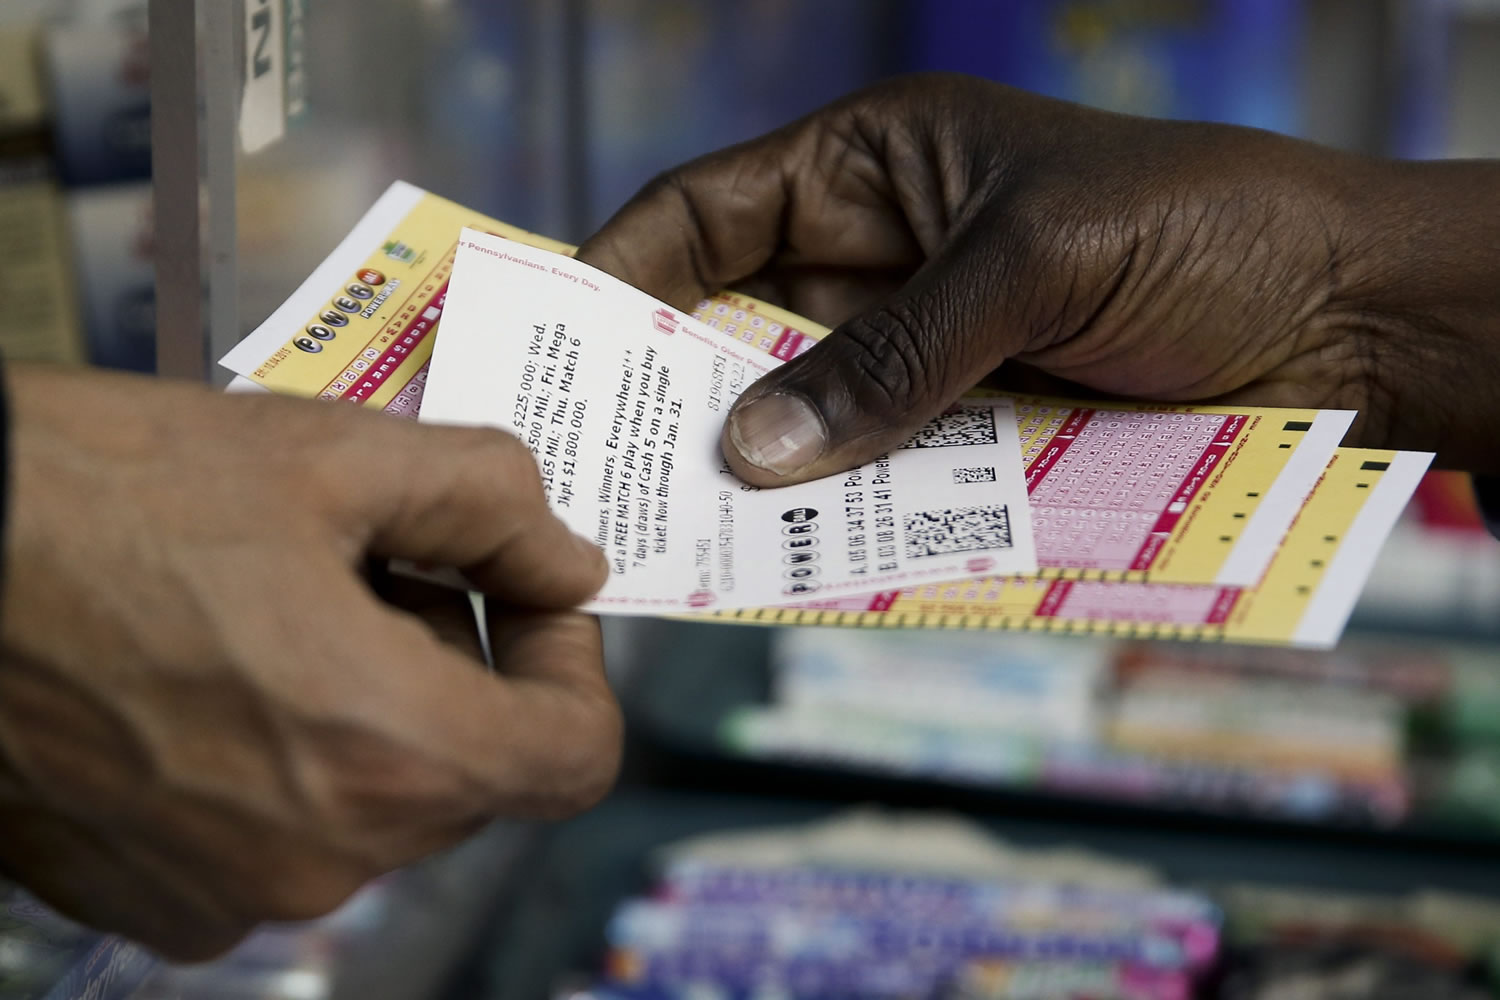 A person purchase Powerball lottery tickets from a newsstand Wednesday in Philadelphia. Players will have a chance Wednesday night at the biggest lottery prize in nearly a year.